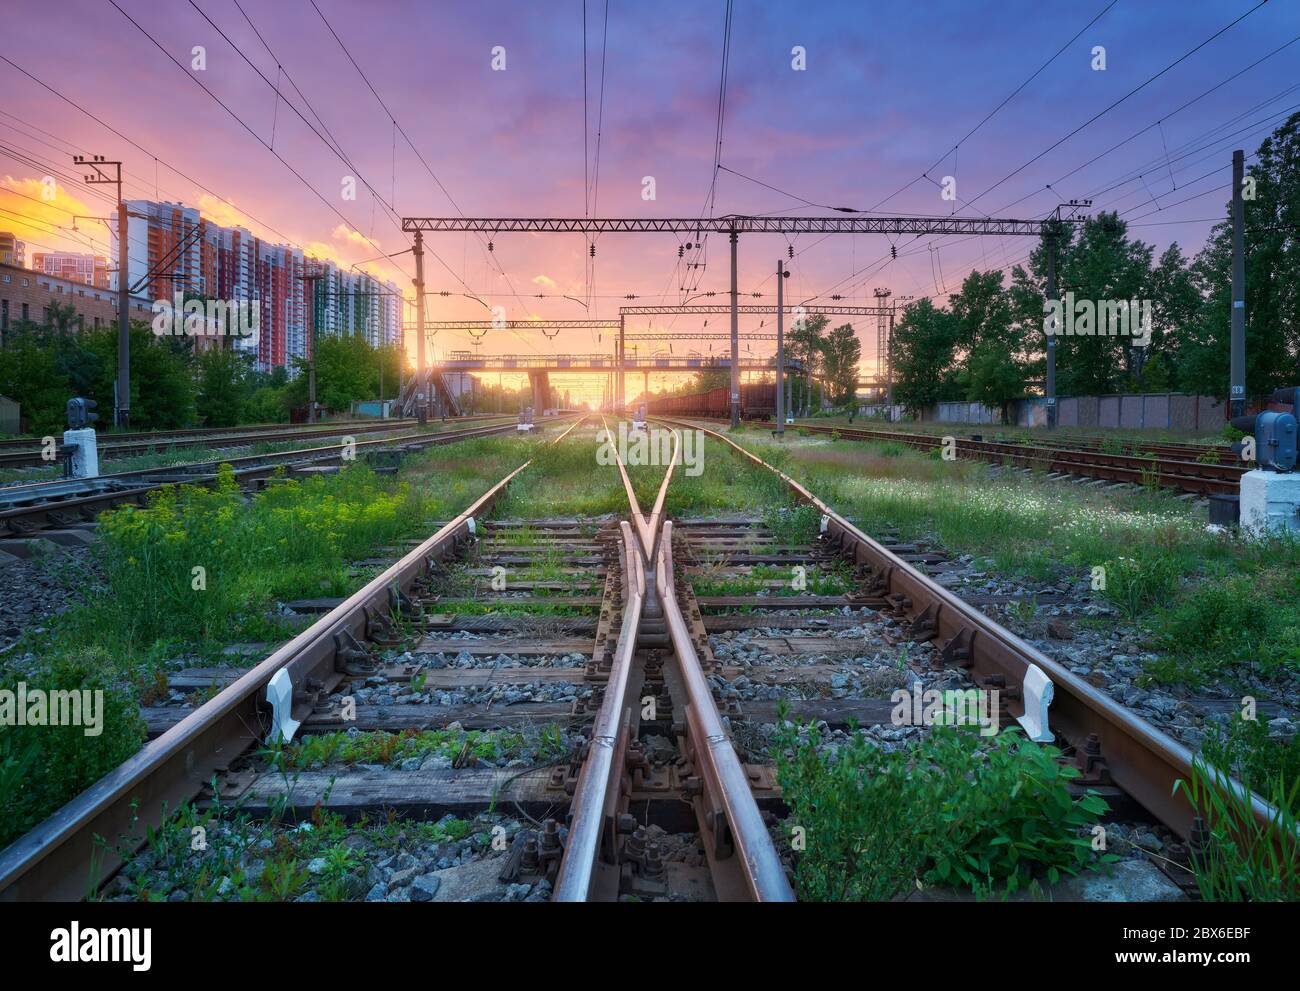 Railway station with freight trains at colorful sunset Stock Photo